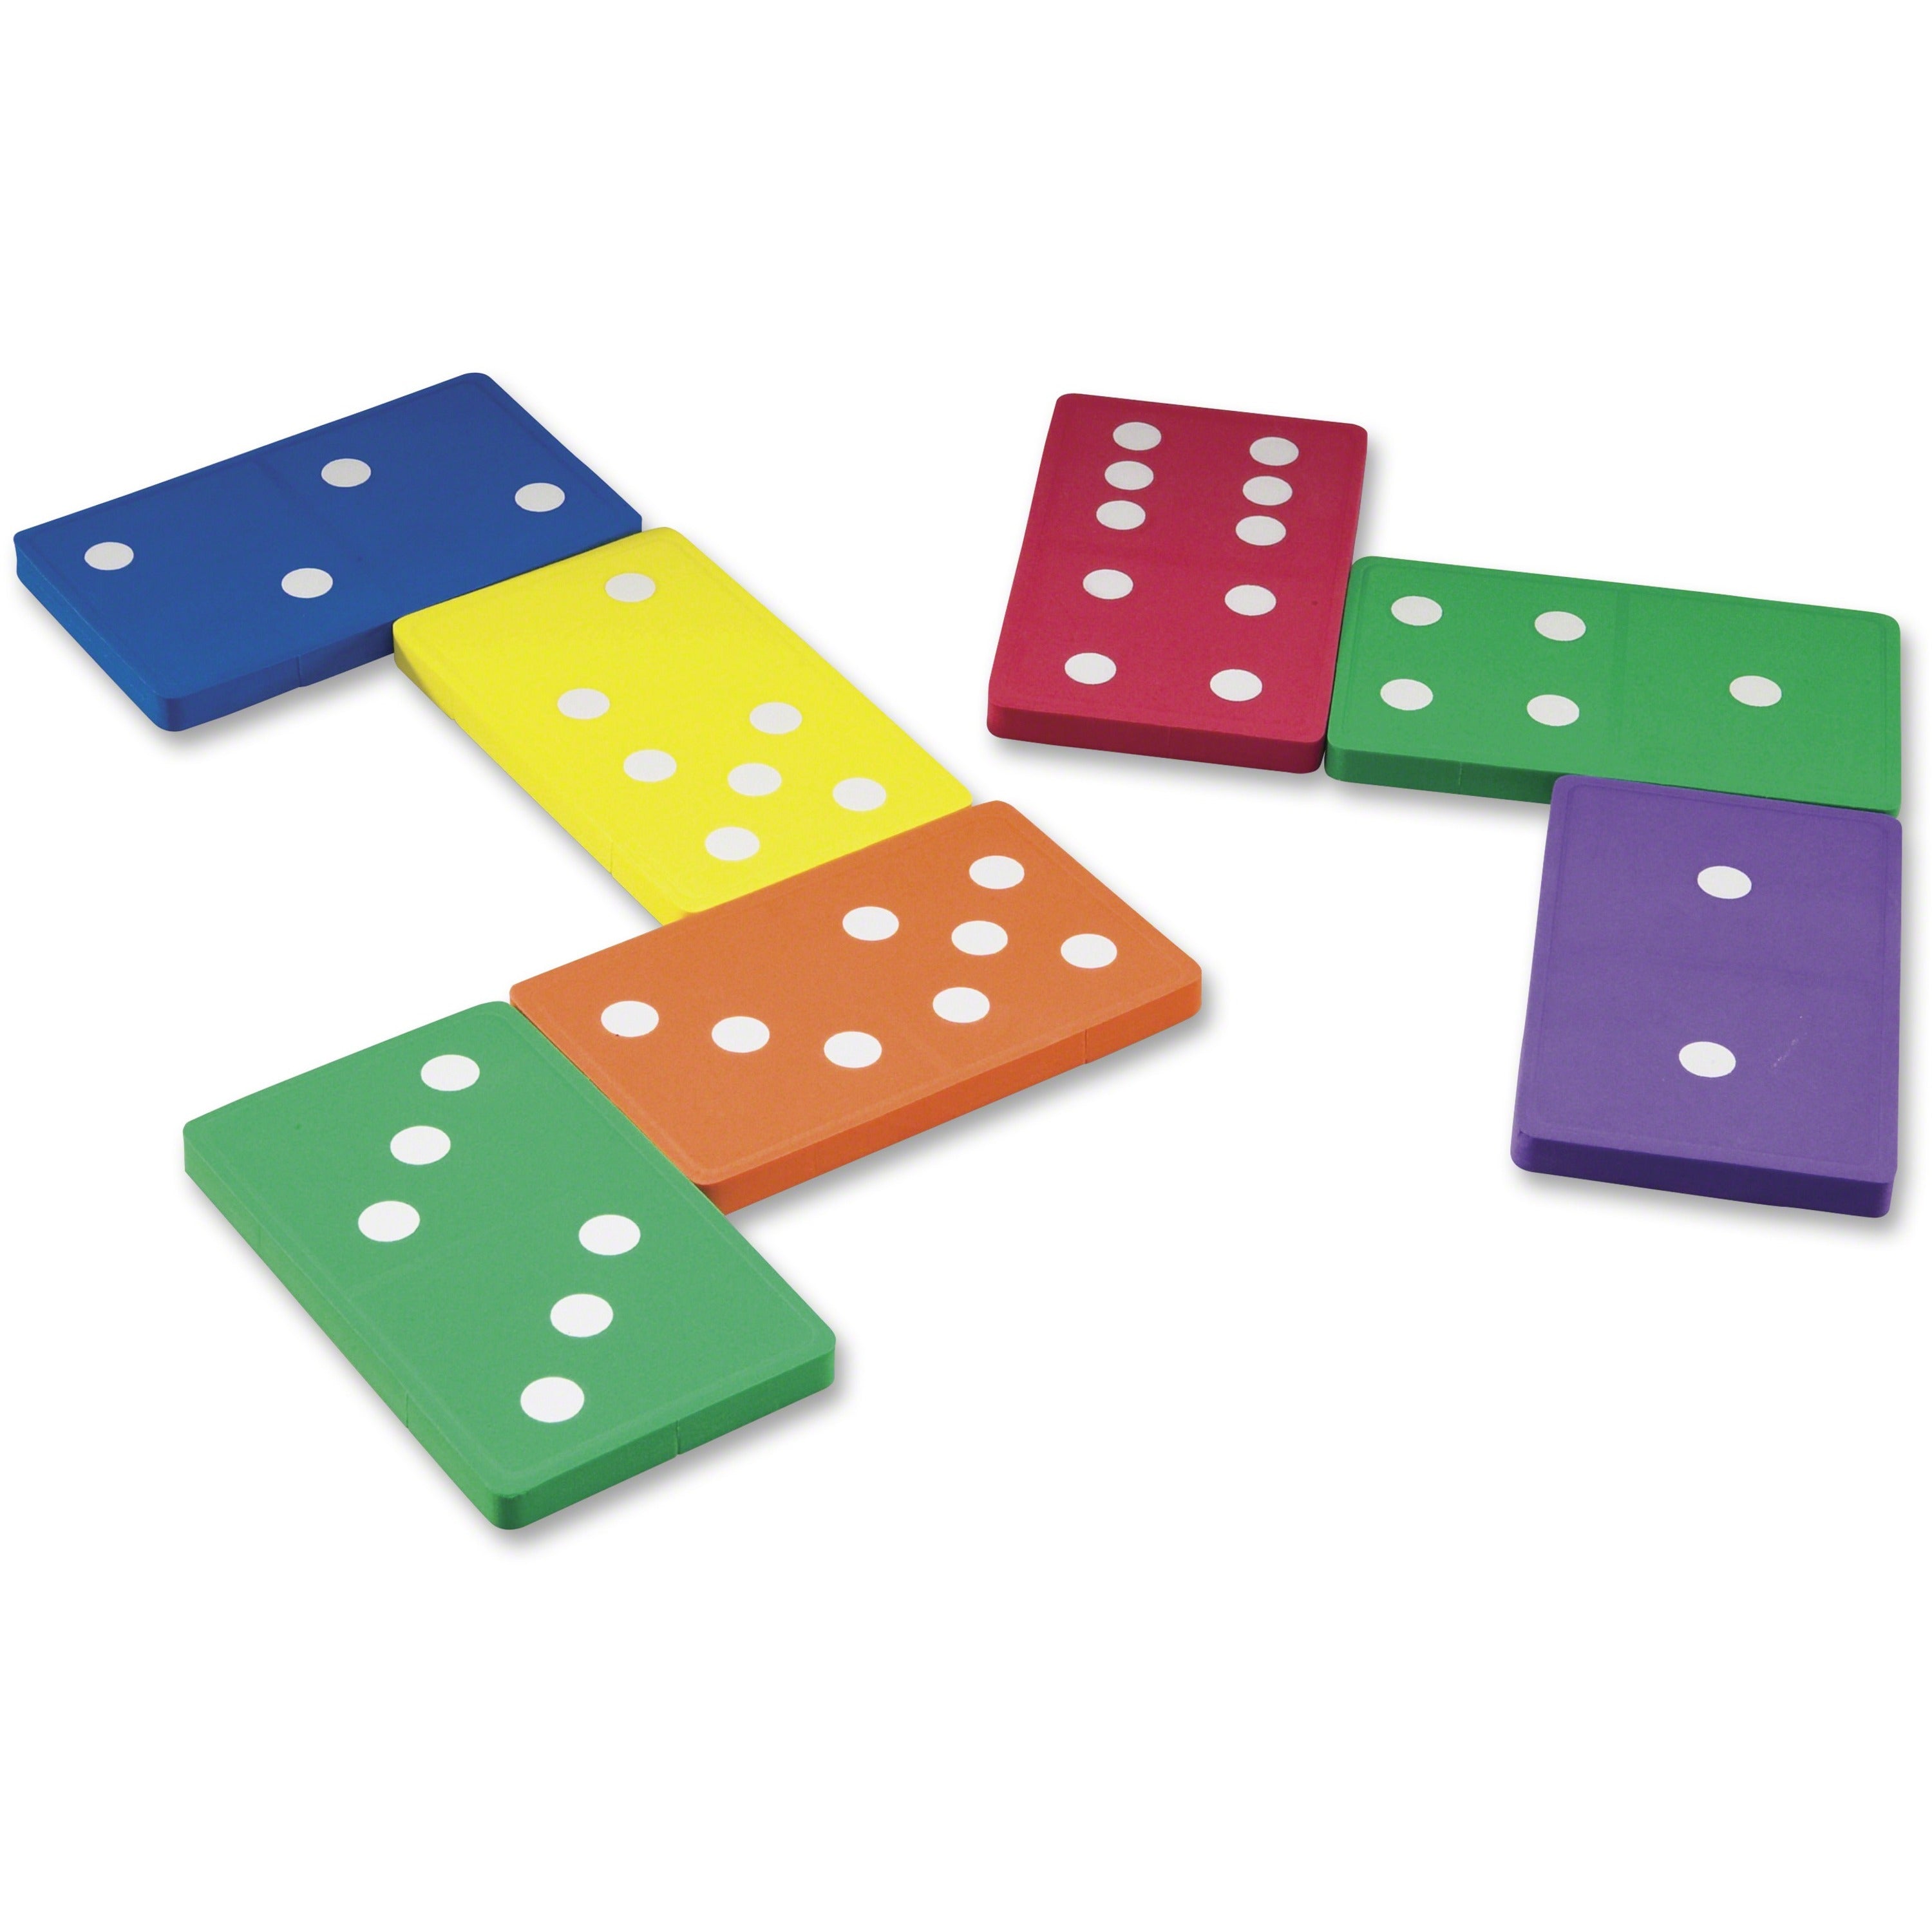 Learning Resources Foam Jumbo Dominoes - Skill Learning: Sorting, Patterning, Arithmetic, Fraction, Logic - 5 Year & Up - Multi - 